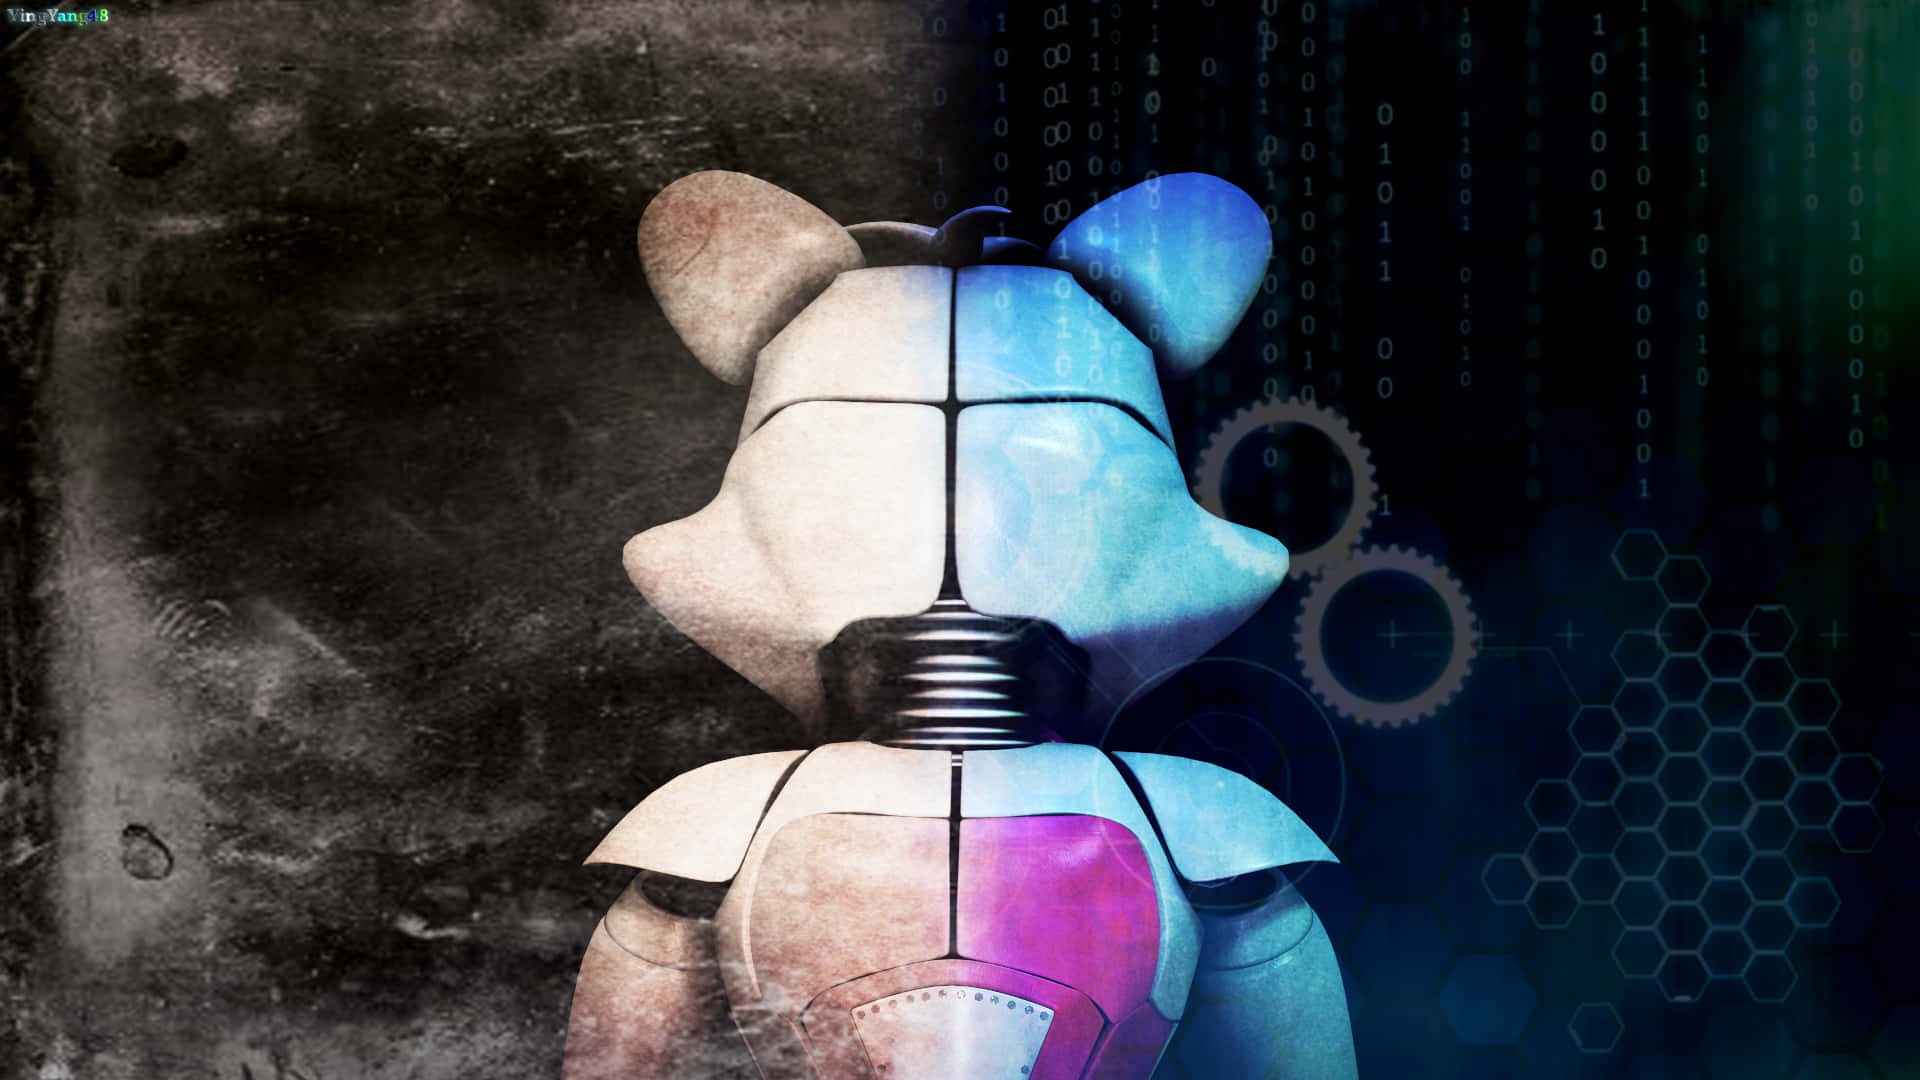 Five Nights At Freddy's: Sister Location Back View Wallpaper